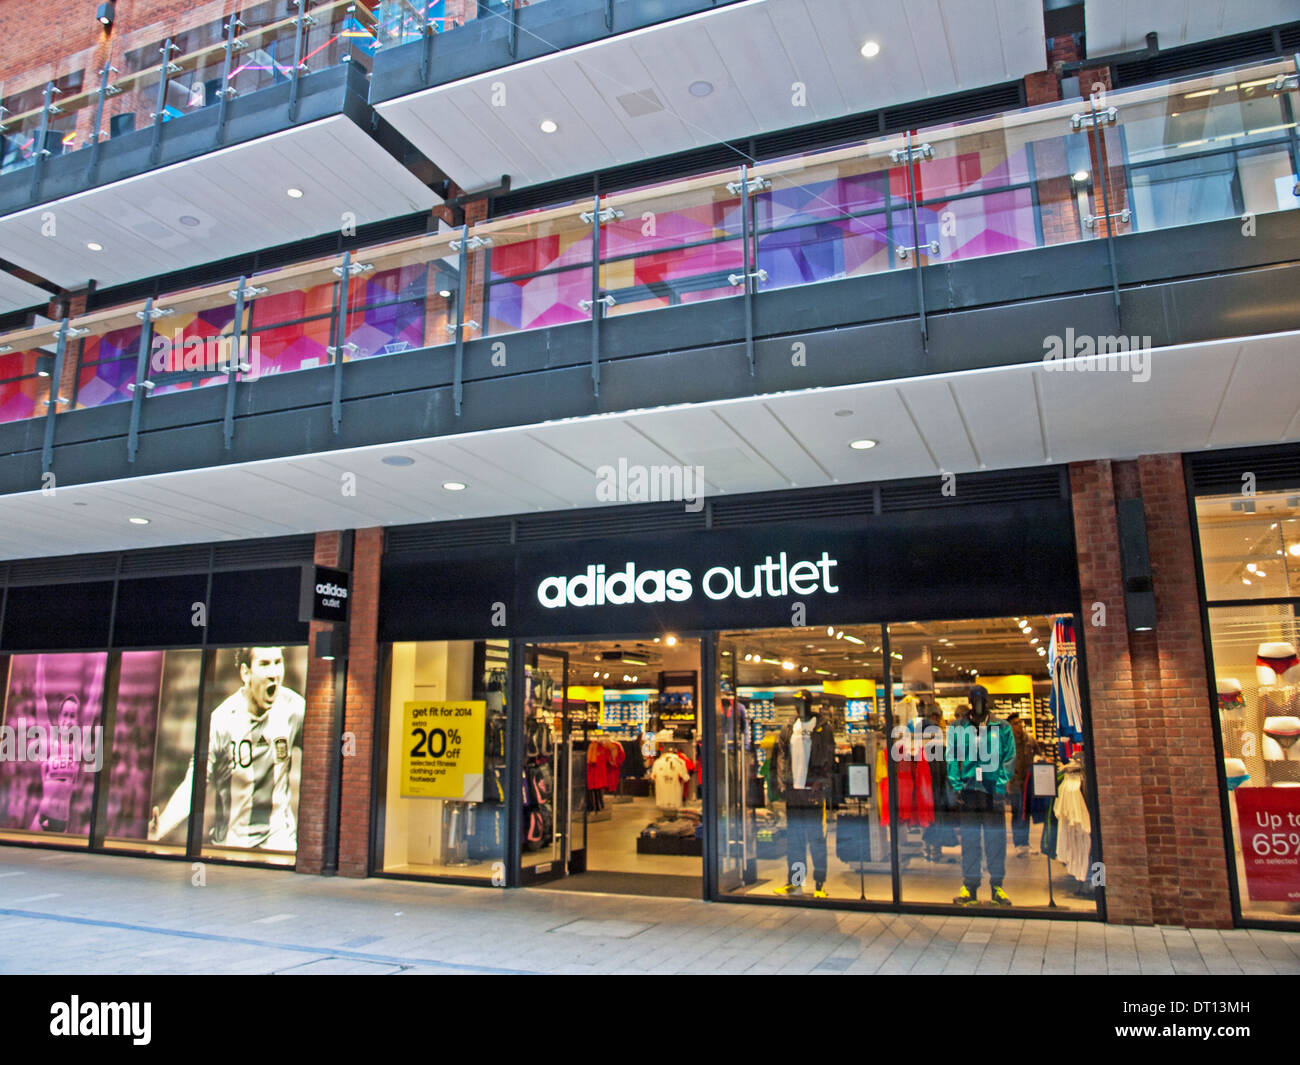 b5 outlet adidas